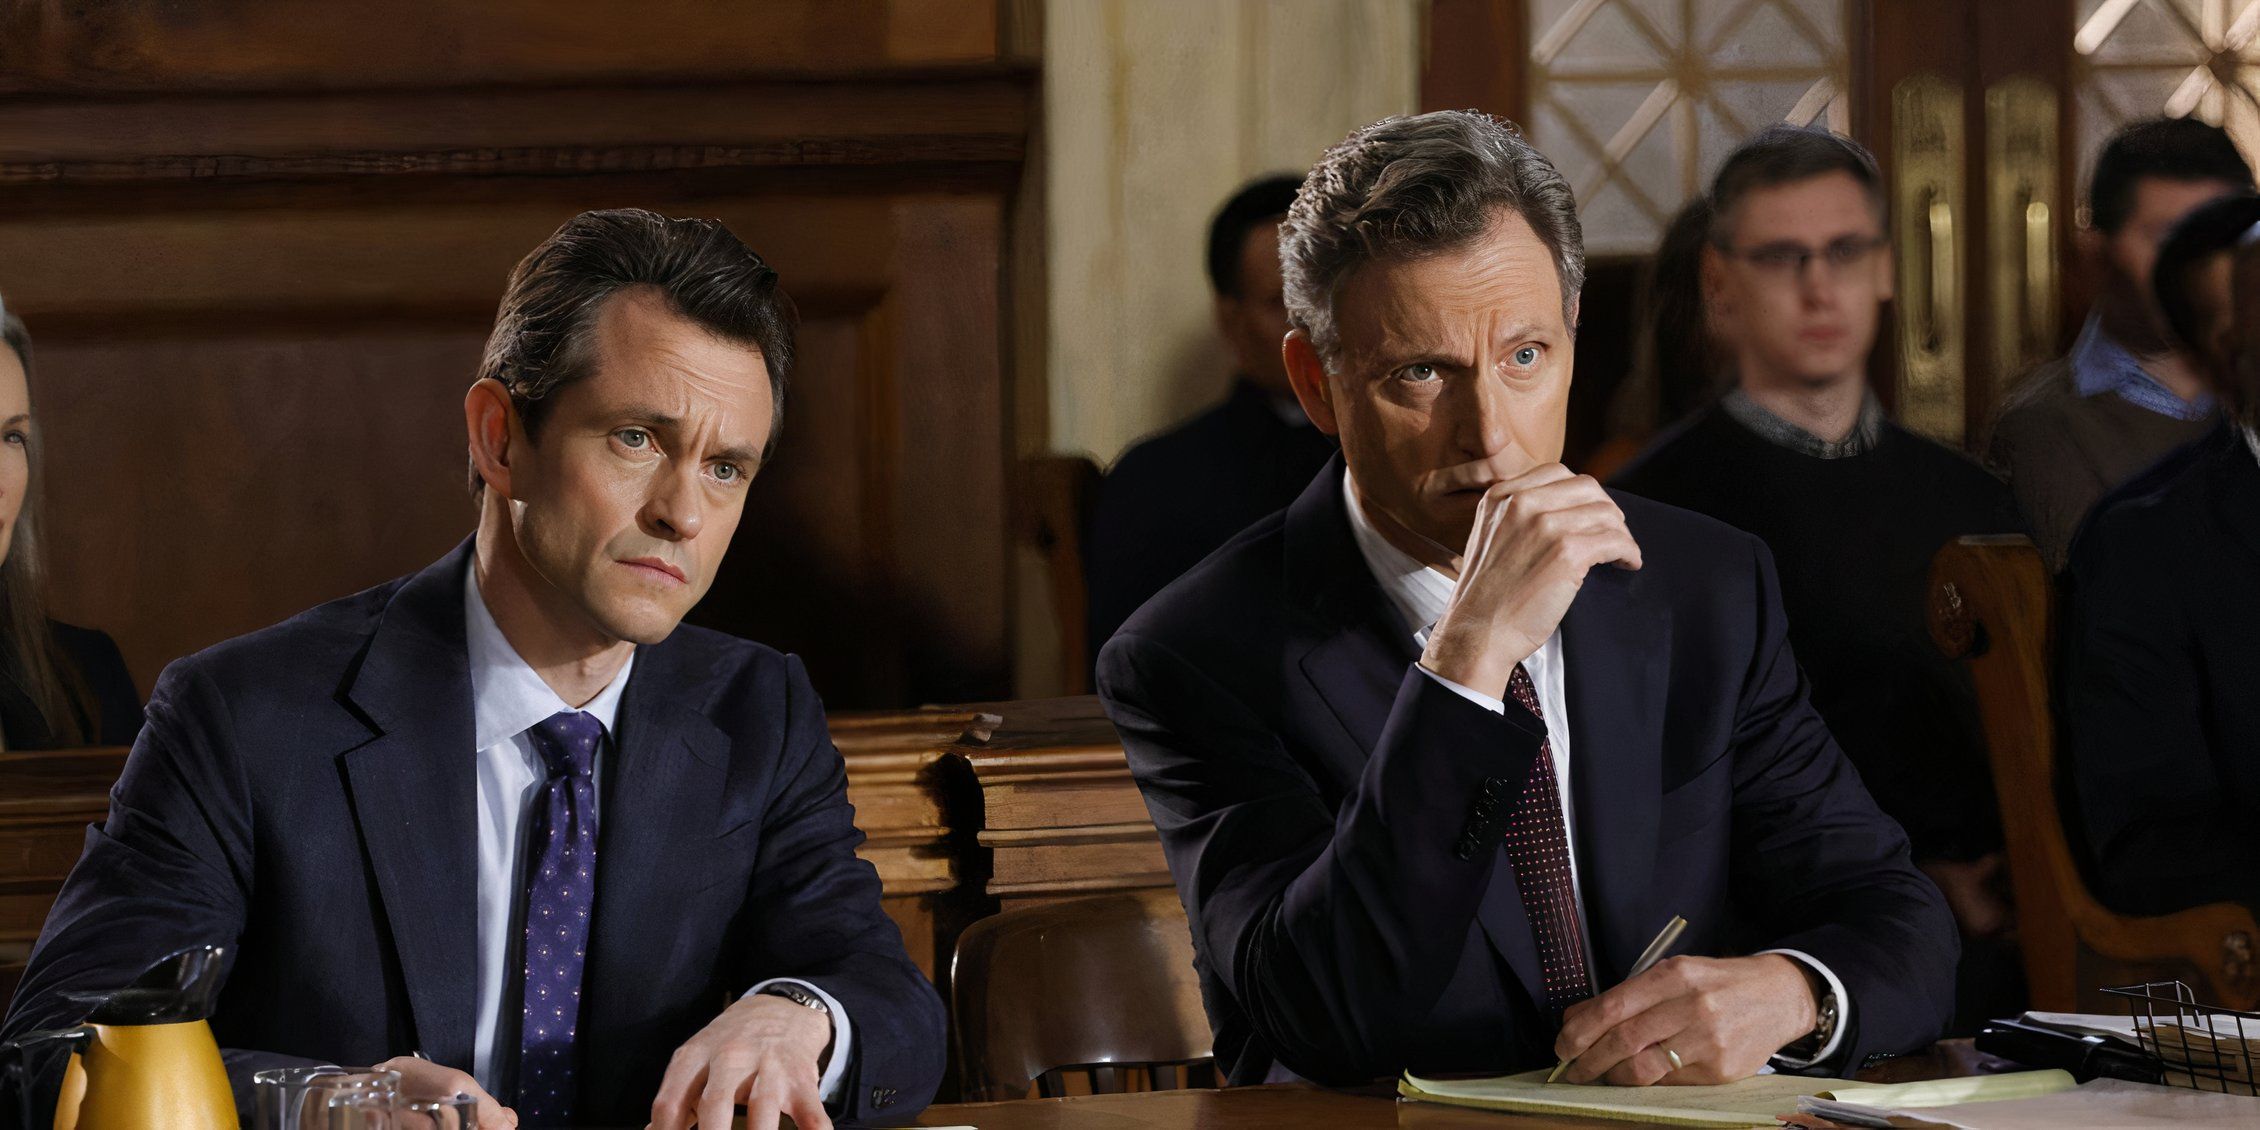 Law & Order Nolan sits second chair next to Baxter during a court case